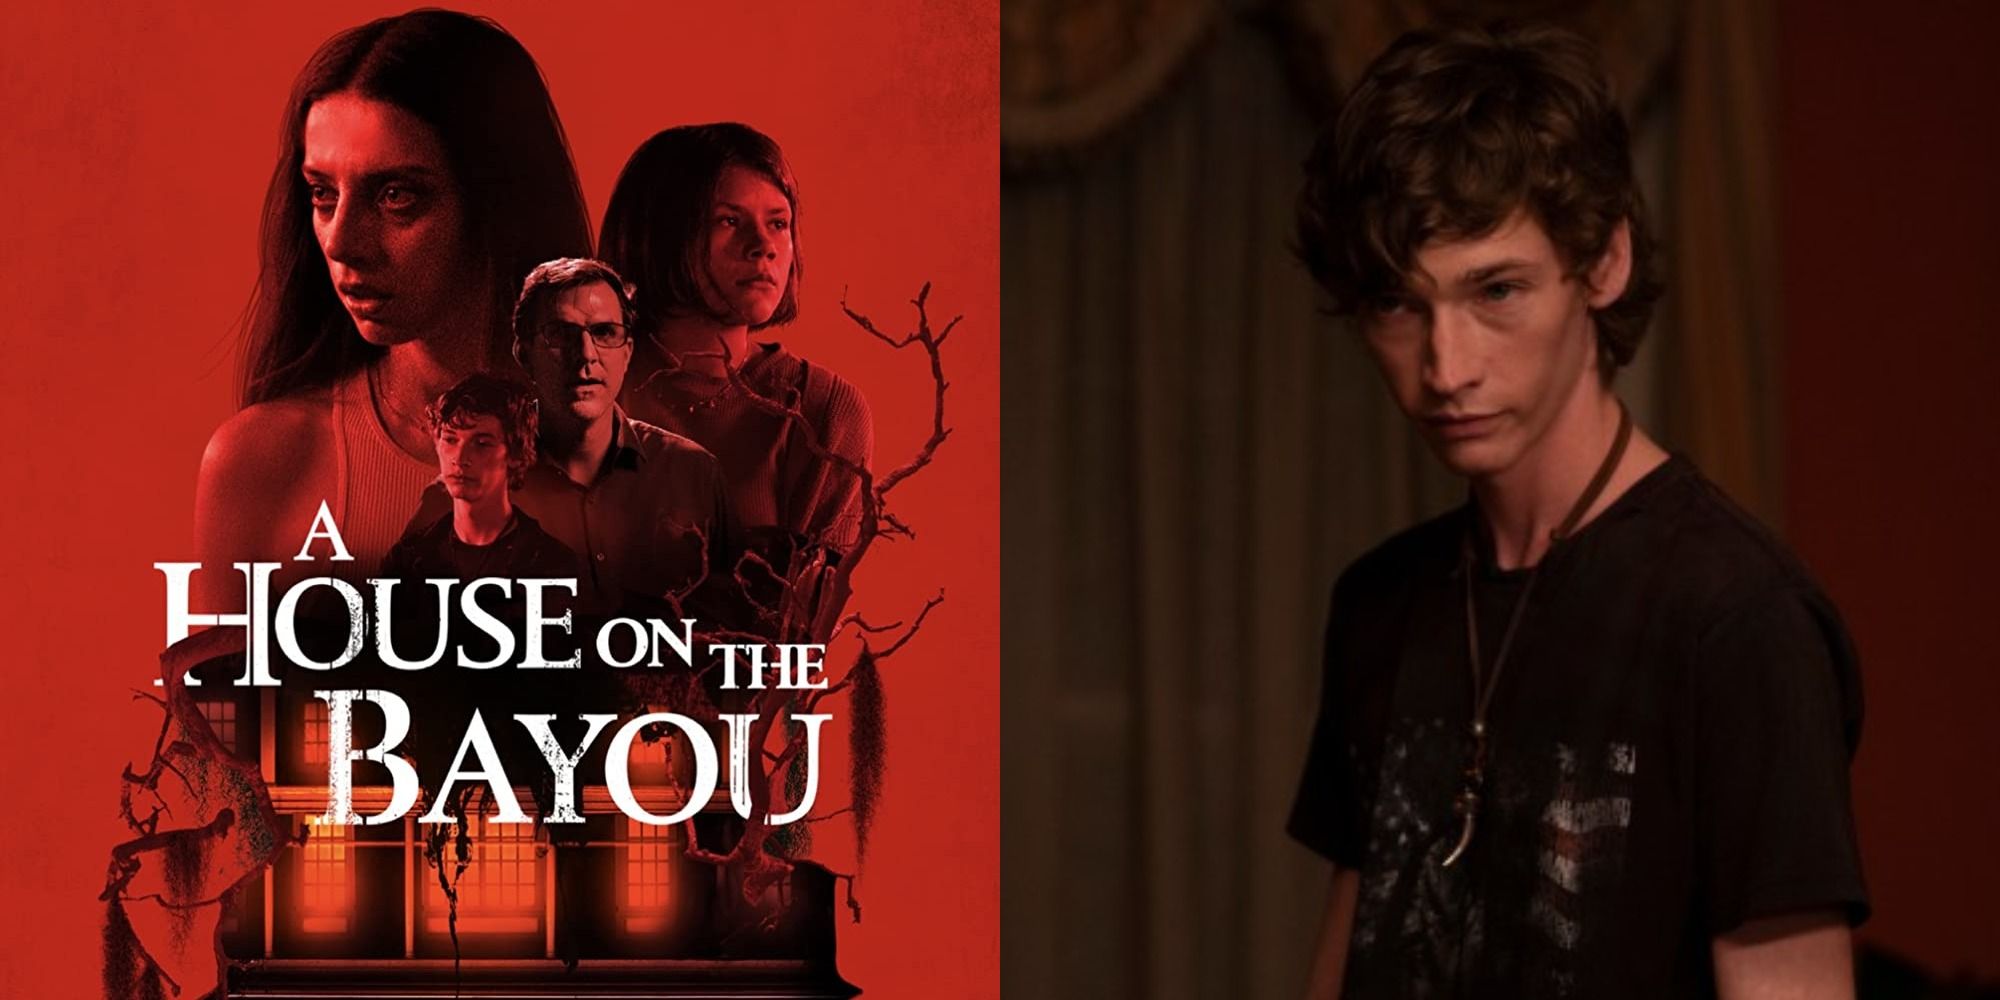 Split image showing a poster ofr A House on the Bayou and Isaac